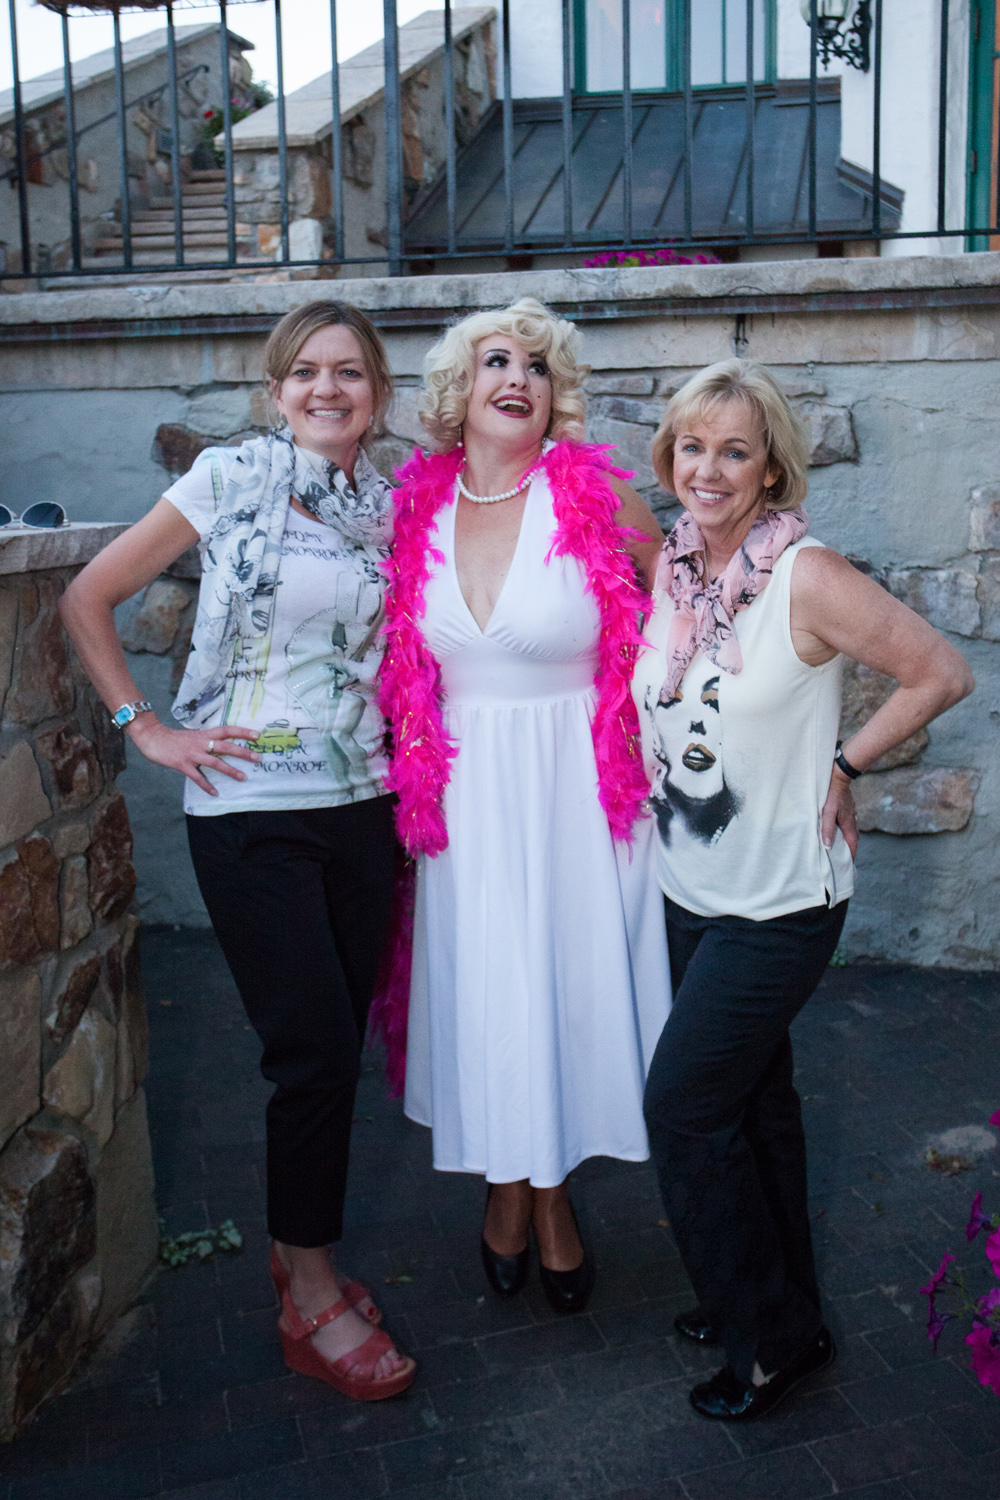 JoAnn and Mindy with Celebrity Marilyn Monroe